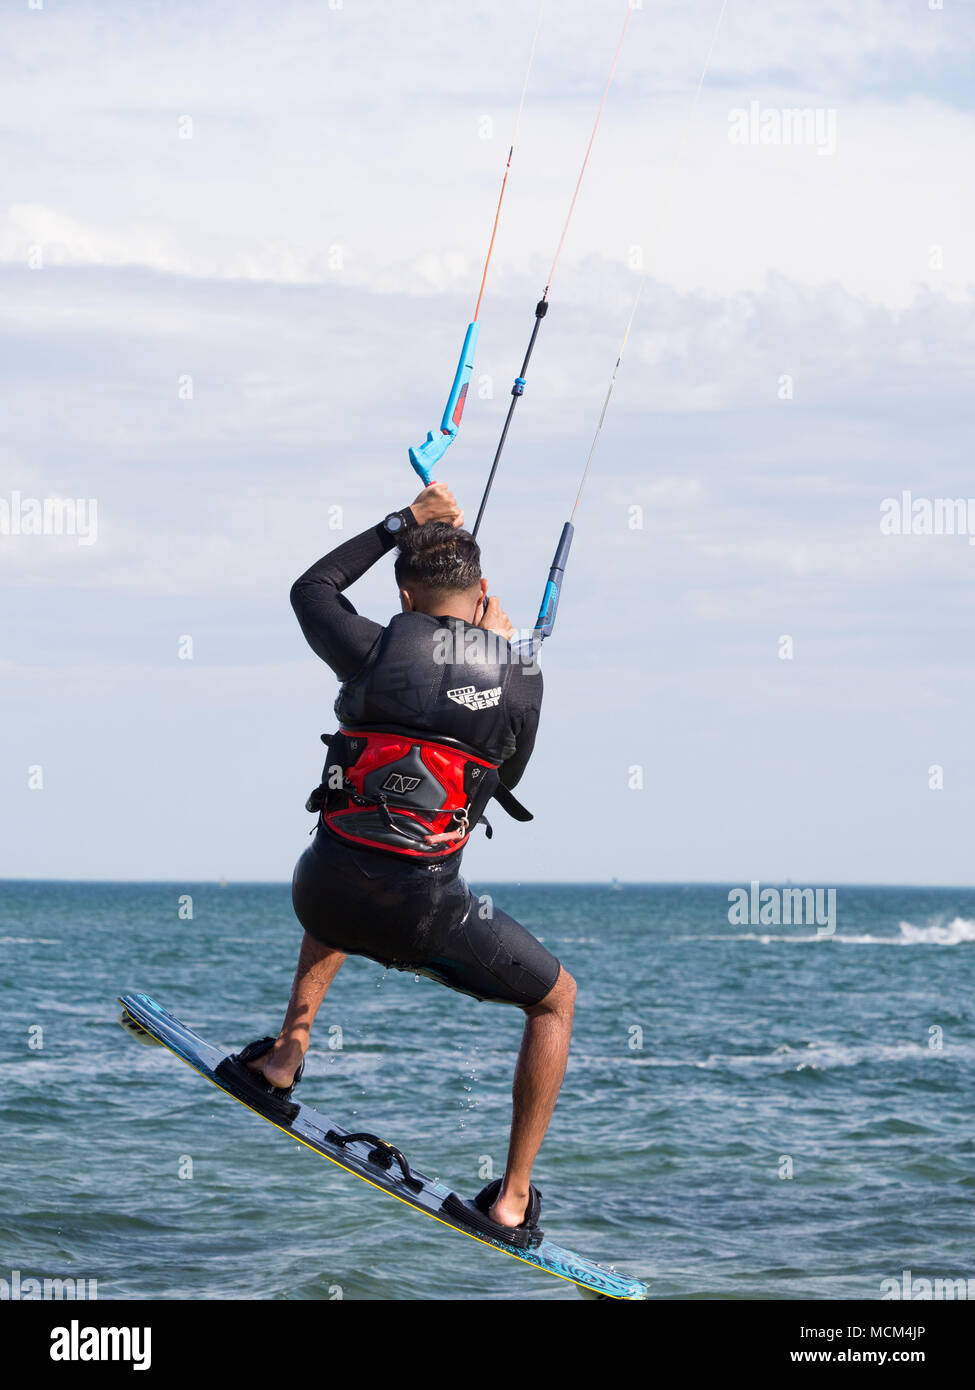 Kiteboarders and kitesurfers on Port Phillip Bay Australia speeding across water, doing tricks, flying in the air on a warm sunny blue sky day Stock Photo